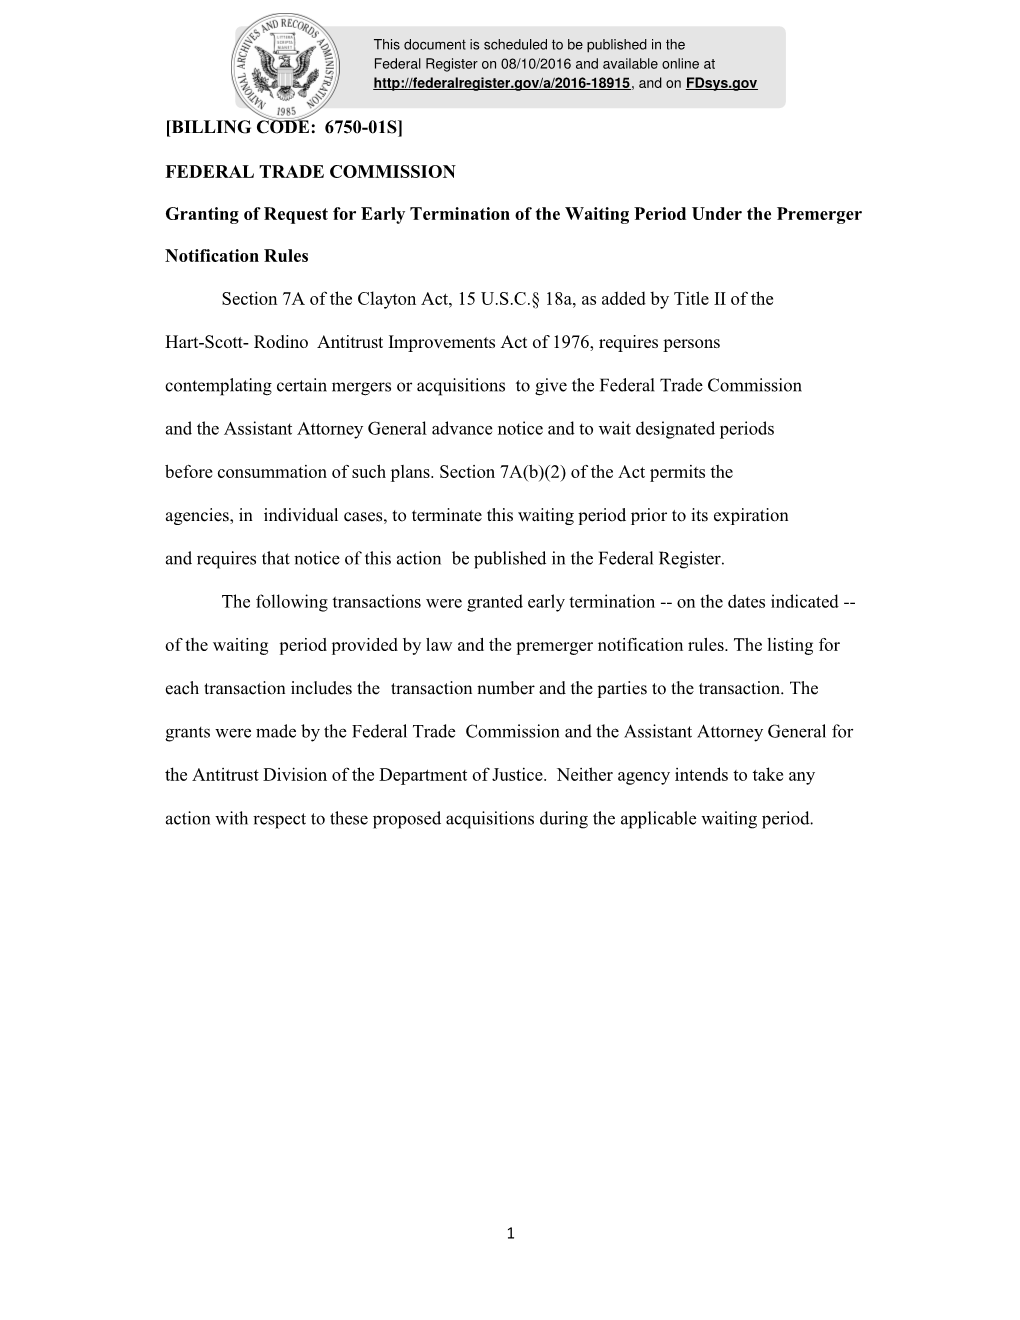 FEDERAL TRADE COMMISSION Granting of Request for Early